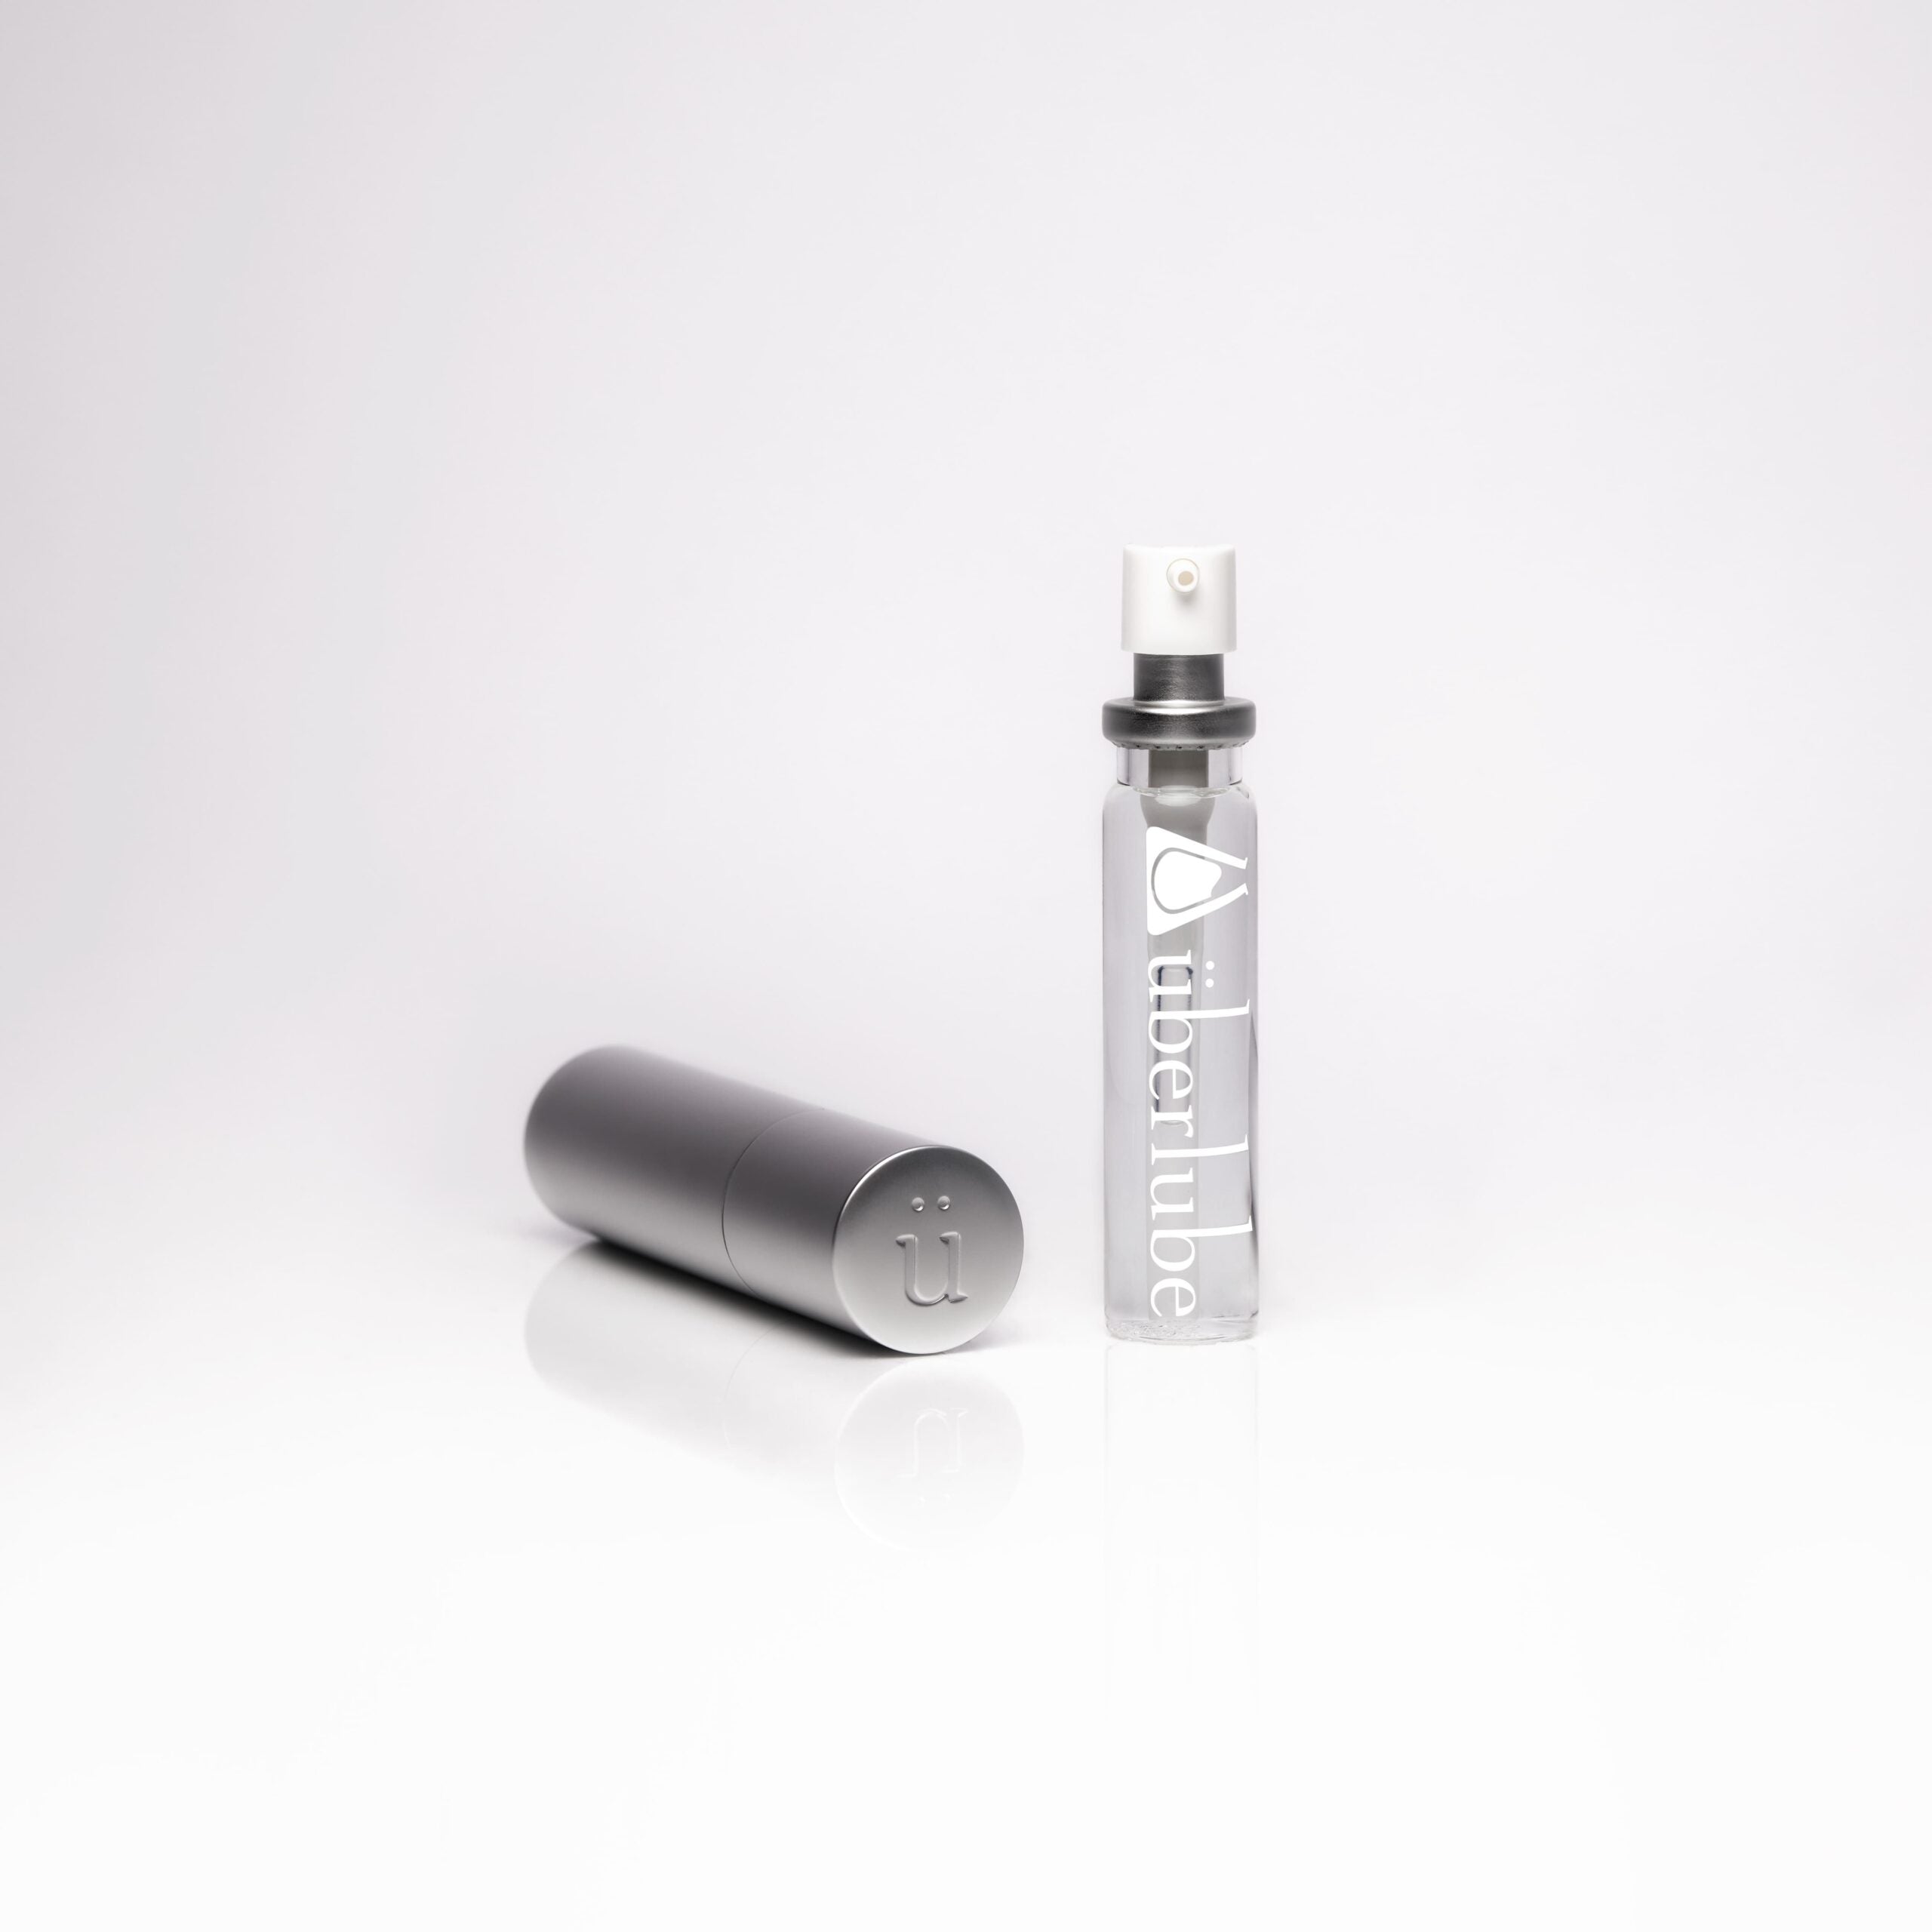 Uberlube Good-To-Go Traveller Silver - PL4YHOUSE - PL4YHOUSE - Uberlube - Lubricant - Uberlube Good-To-Go Traveller Silver - {{ sex }} - {{adult_toys}} - {{UK}} - {{ christmas }}